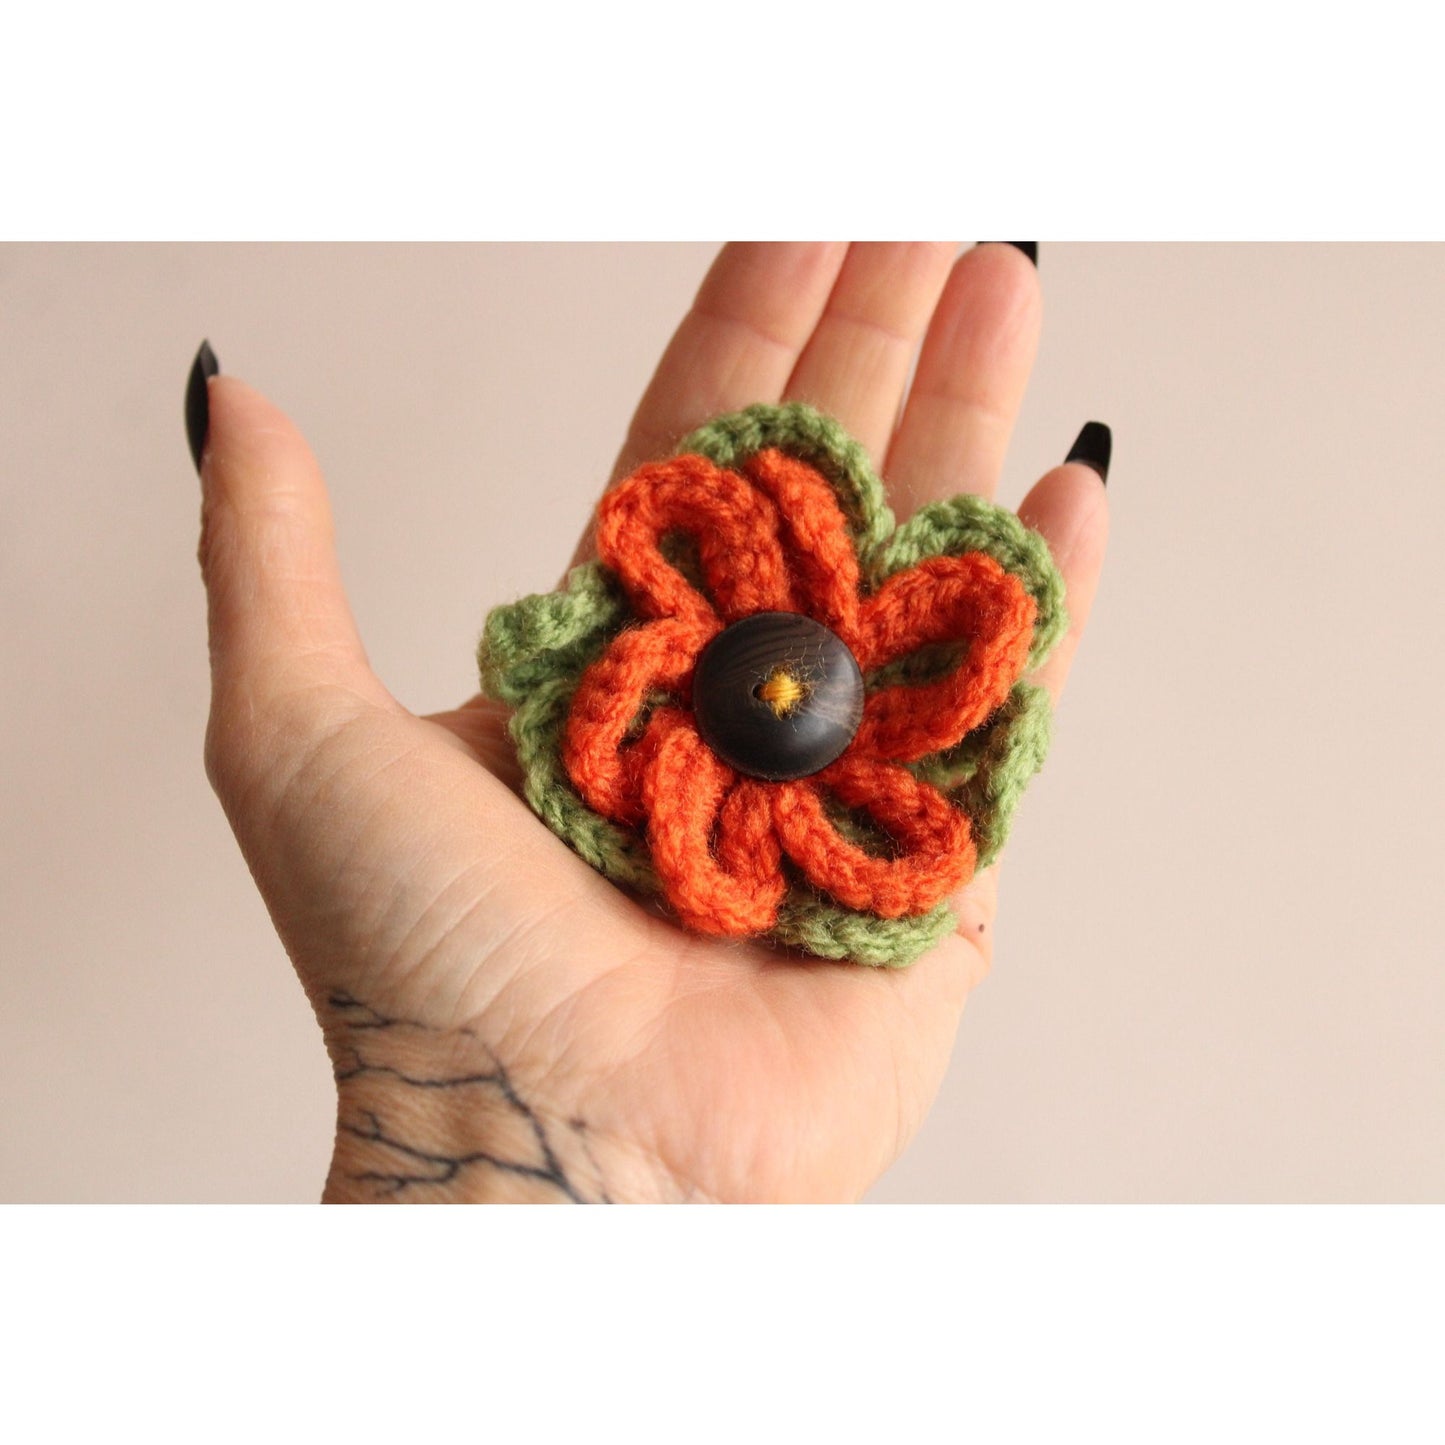 Vintage 1970s Brooch, Knit Flower with Button Center